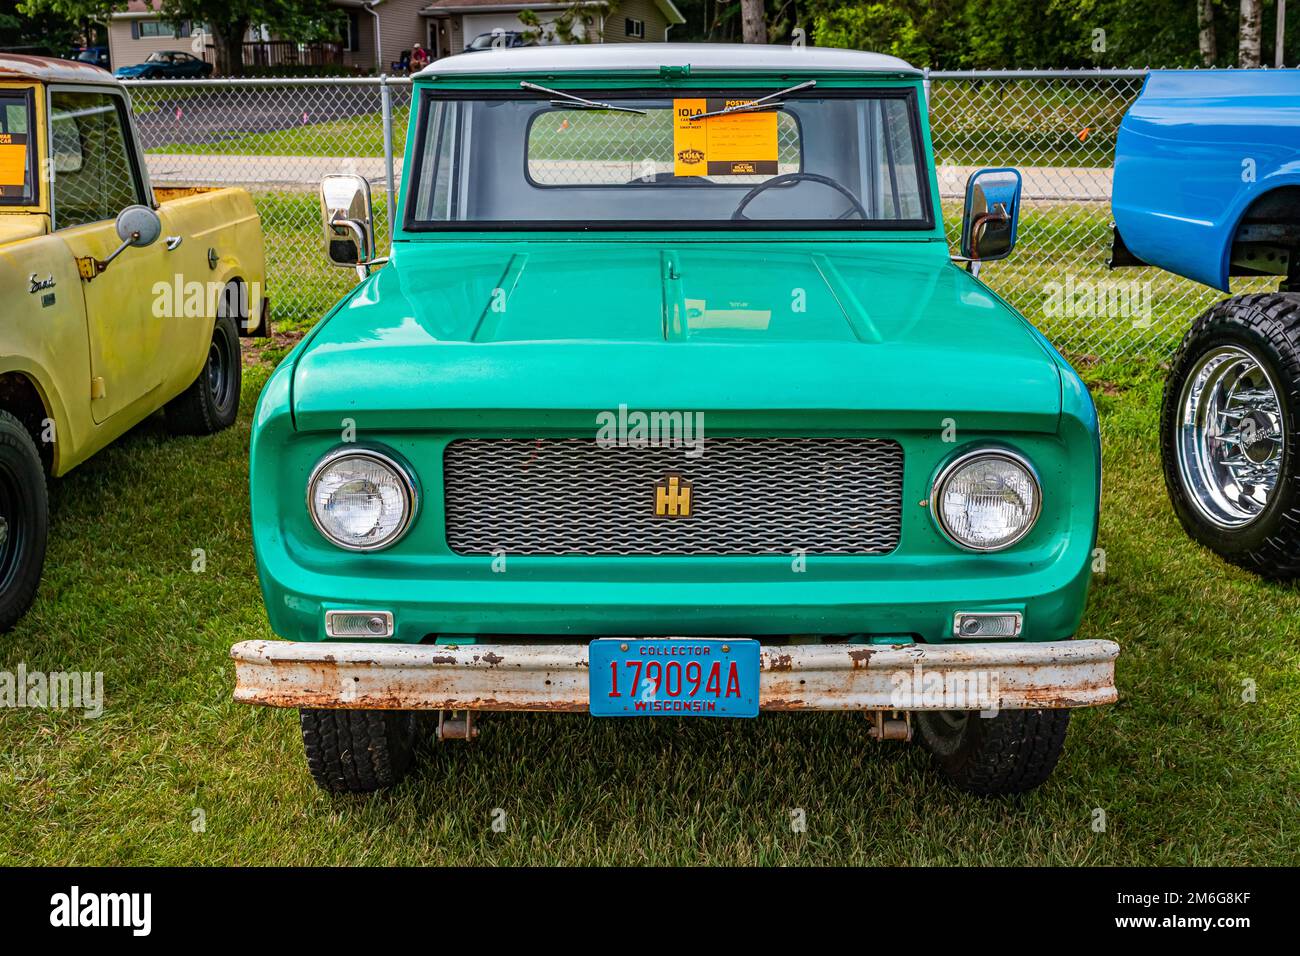 Iola, WI - July 07, 2022: High perspective front view of a 1961 International Harvester Scout 80 Pickup at a local car show. Stock Photo